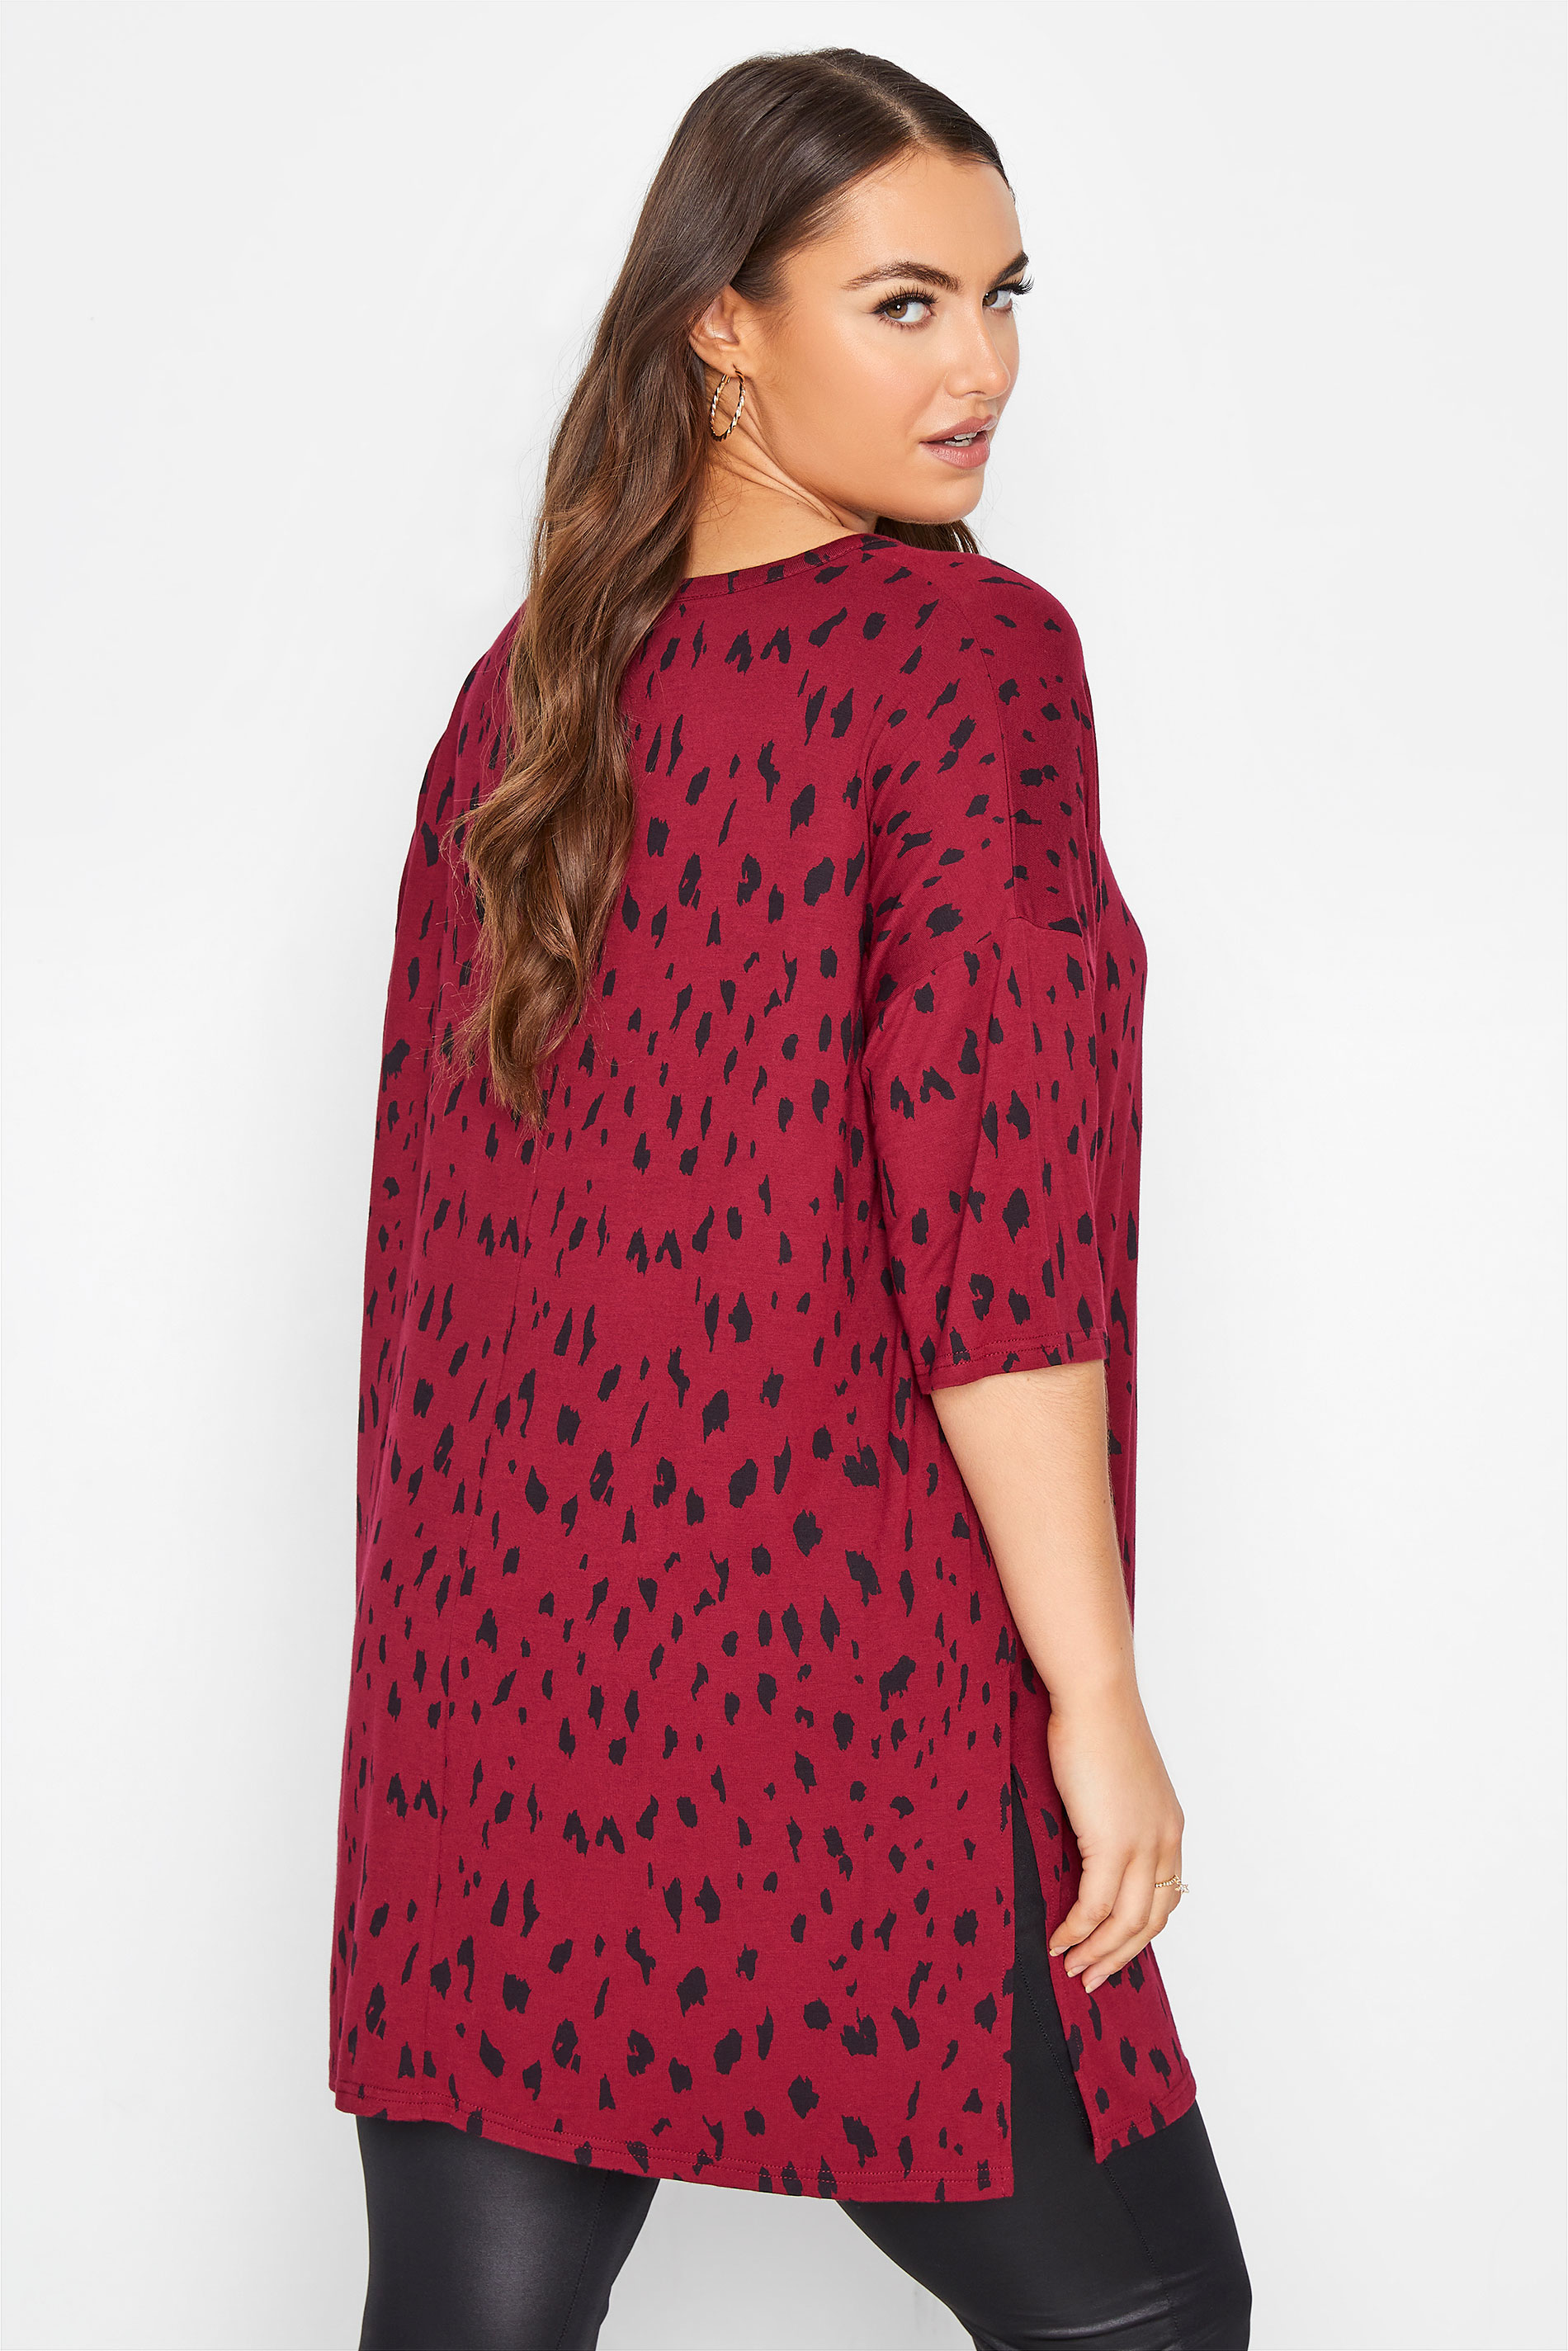 Grande taille  Tops Grande taille  Tops Casual | T-Shirt Rouge Vin Oversize Imprimé Animal - SF79882